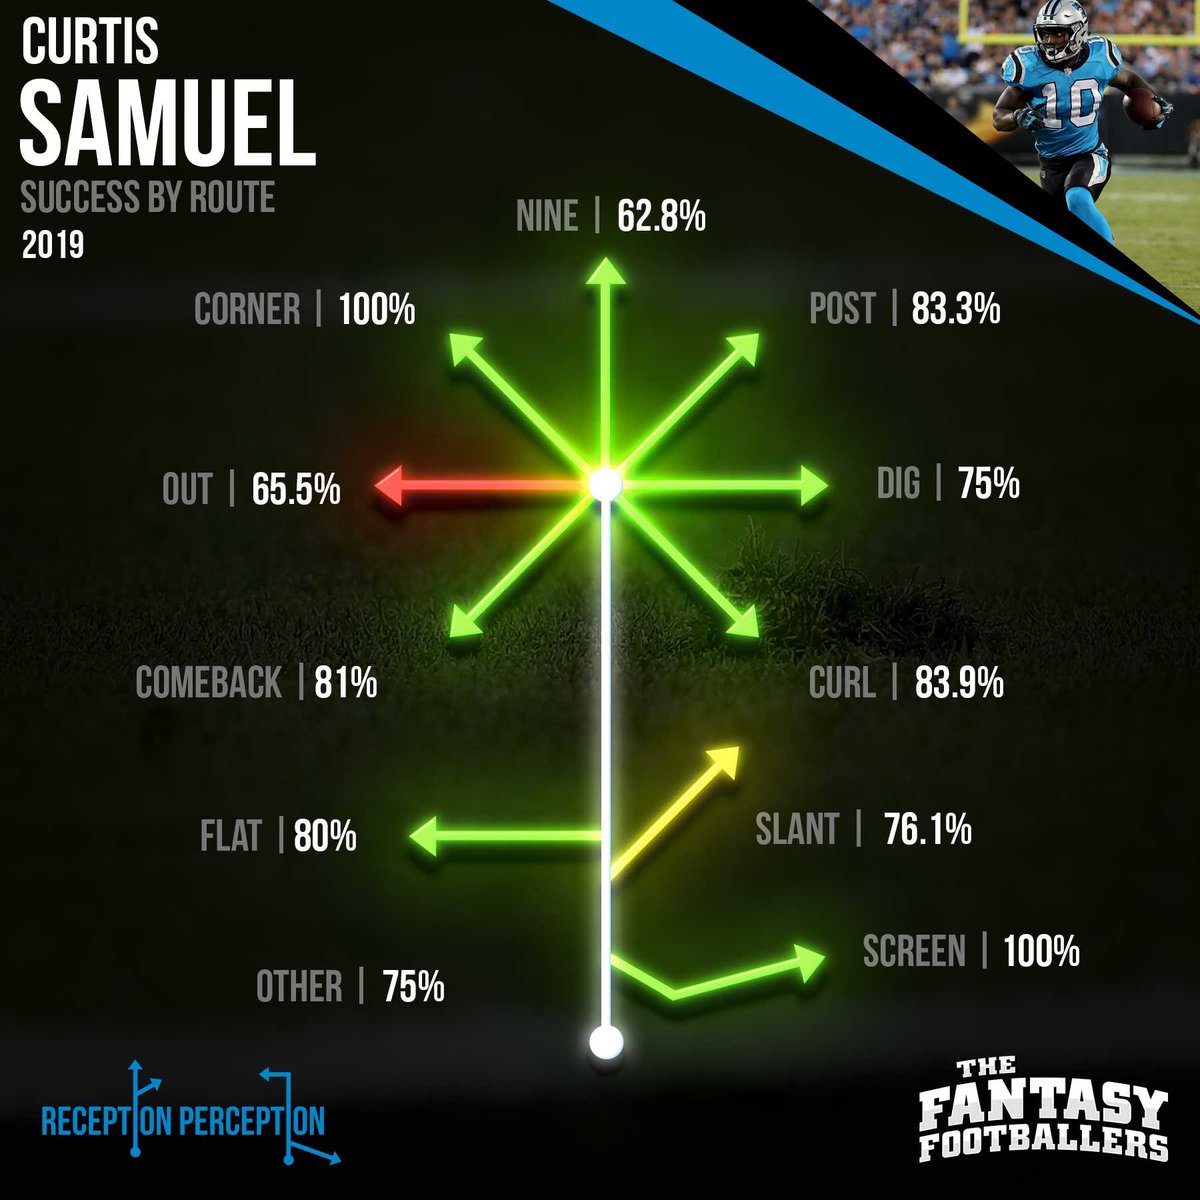 I am of the belief that Samuel is not the culprit here.  @MattHarmon_BYB 's  #receptionperception shows that Samuel was consistently winning on his routes for the past two years.